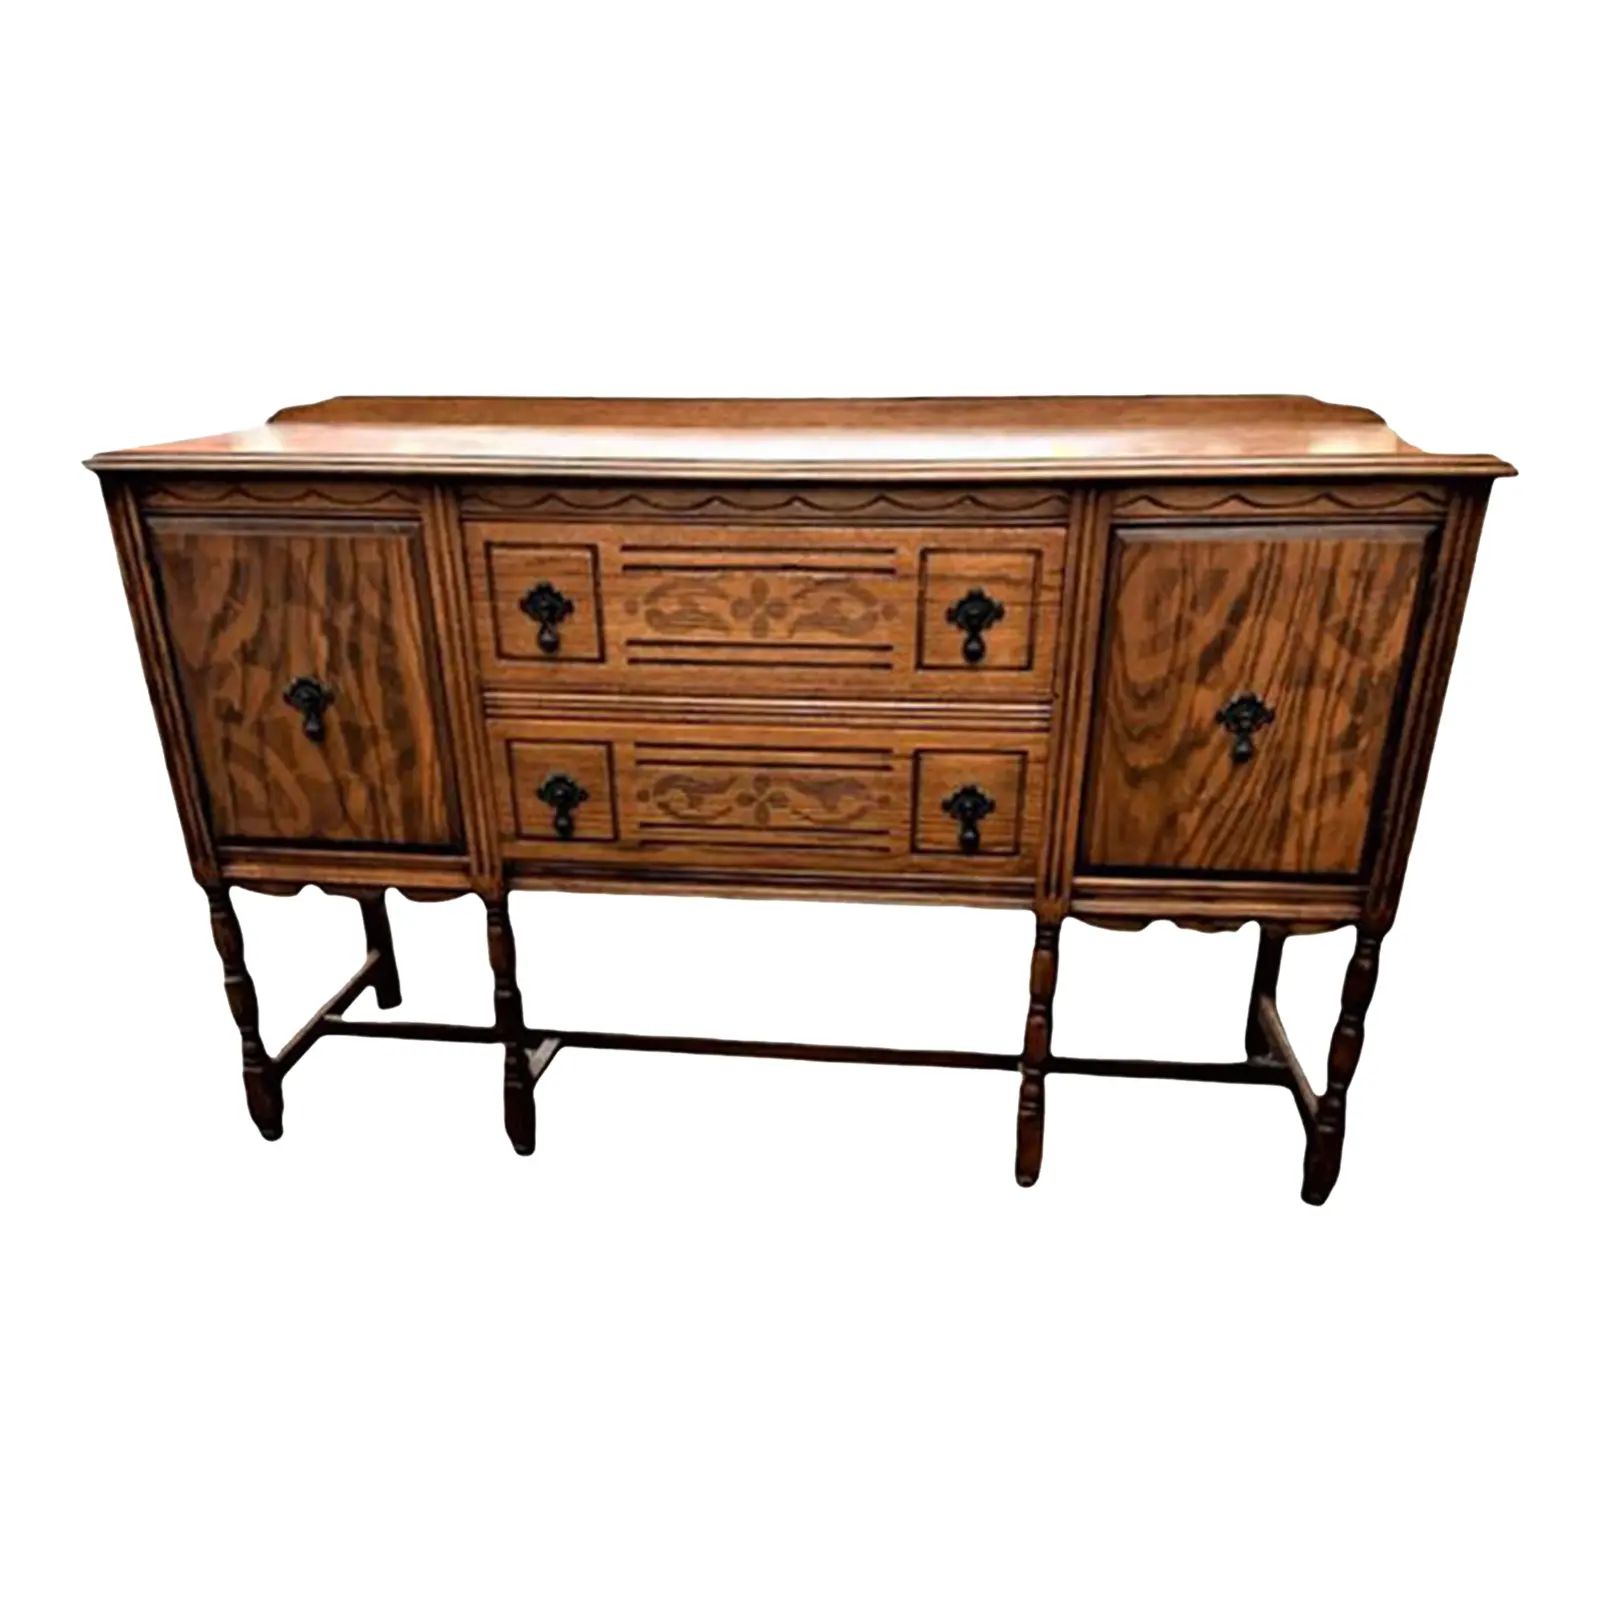 Early 20th Century Spanish Revival Solid Oak Sideboard Buffet | Chairish